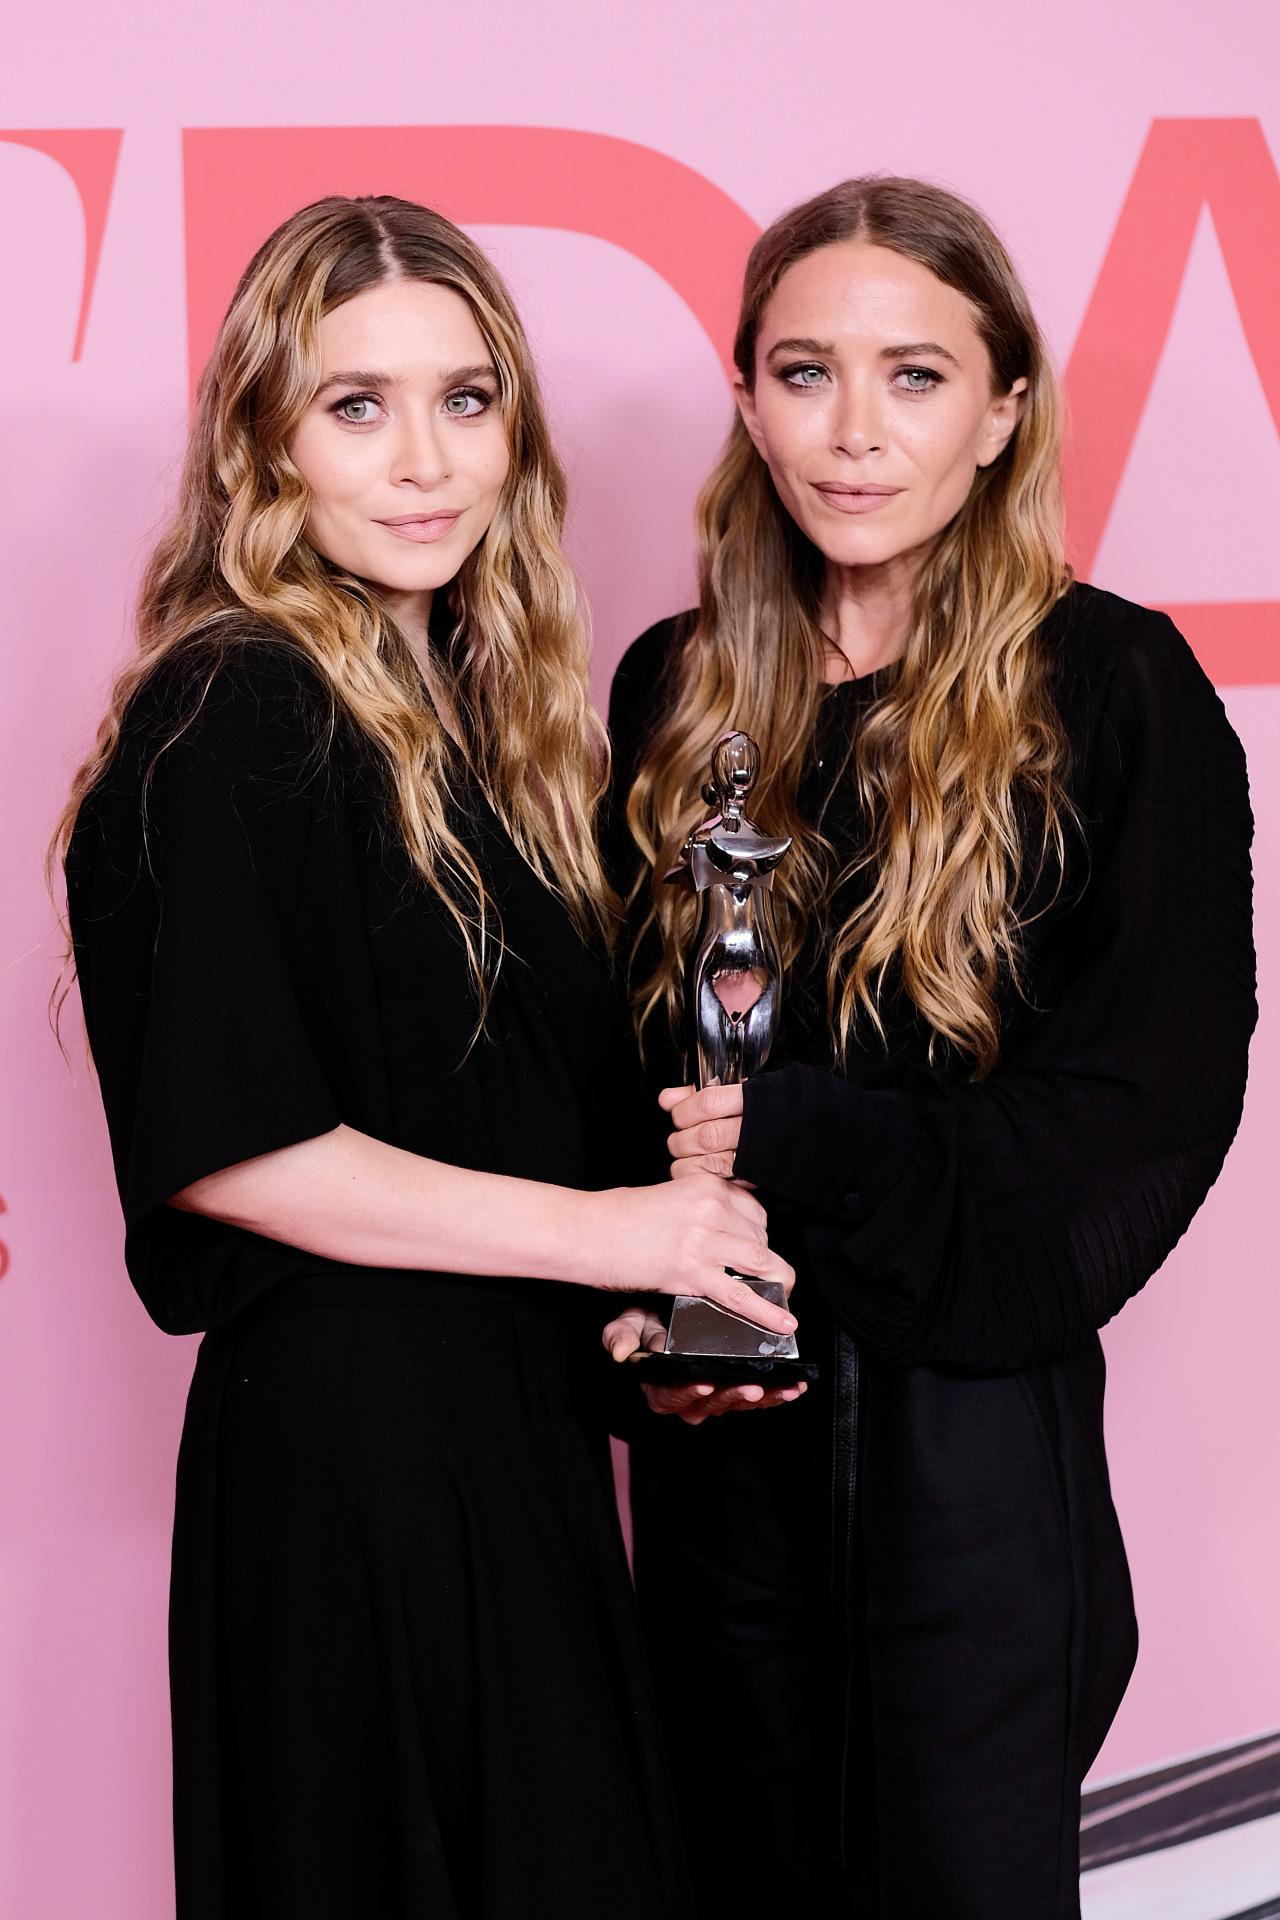 Everyone Should Help Fund This Hilarious Olsen Twins Art Exhibition